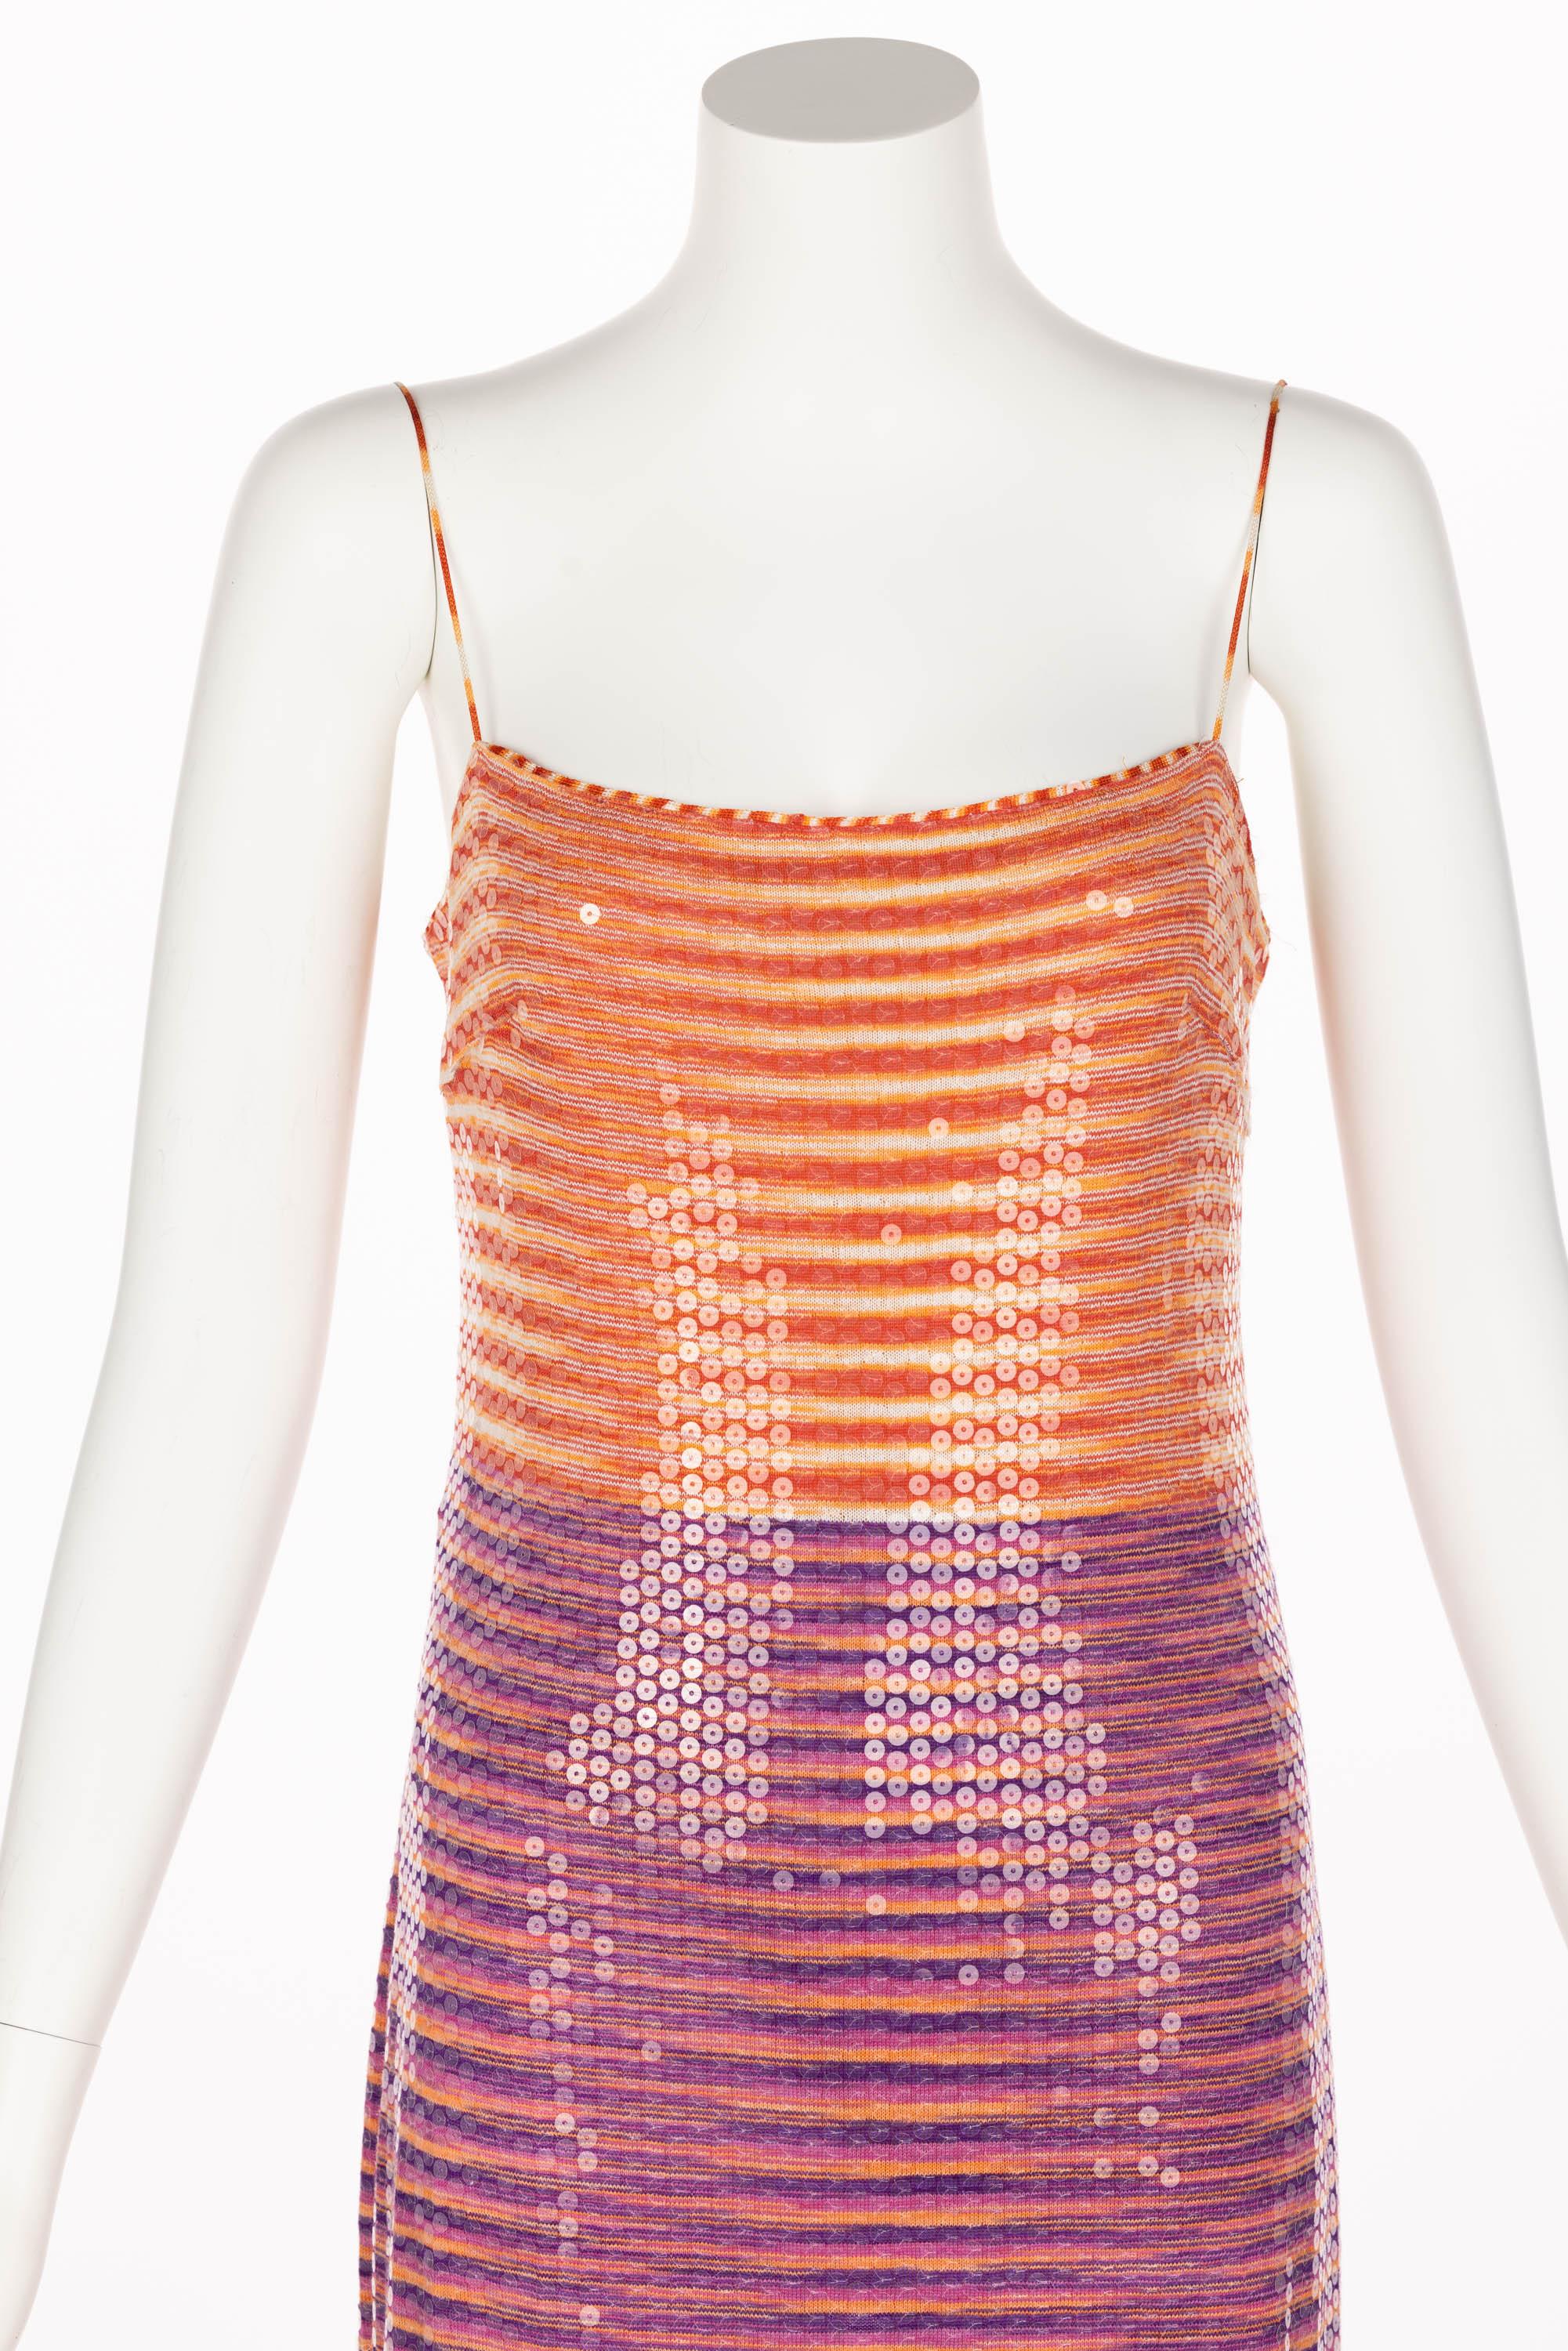 Missoni Purple Pink Sequined Maxi Slip Dress, S/S 1997 Documented at 1stDibs